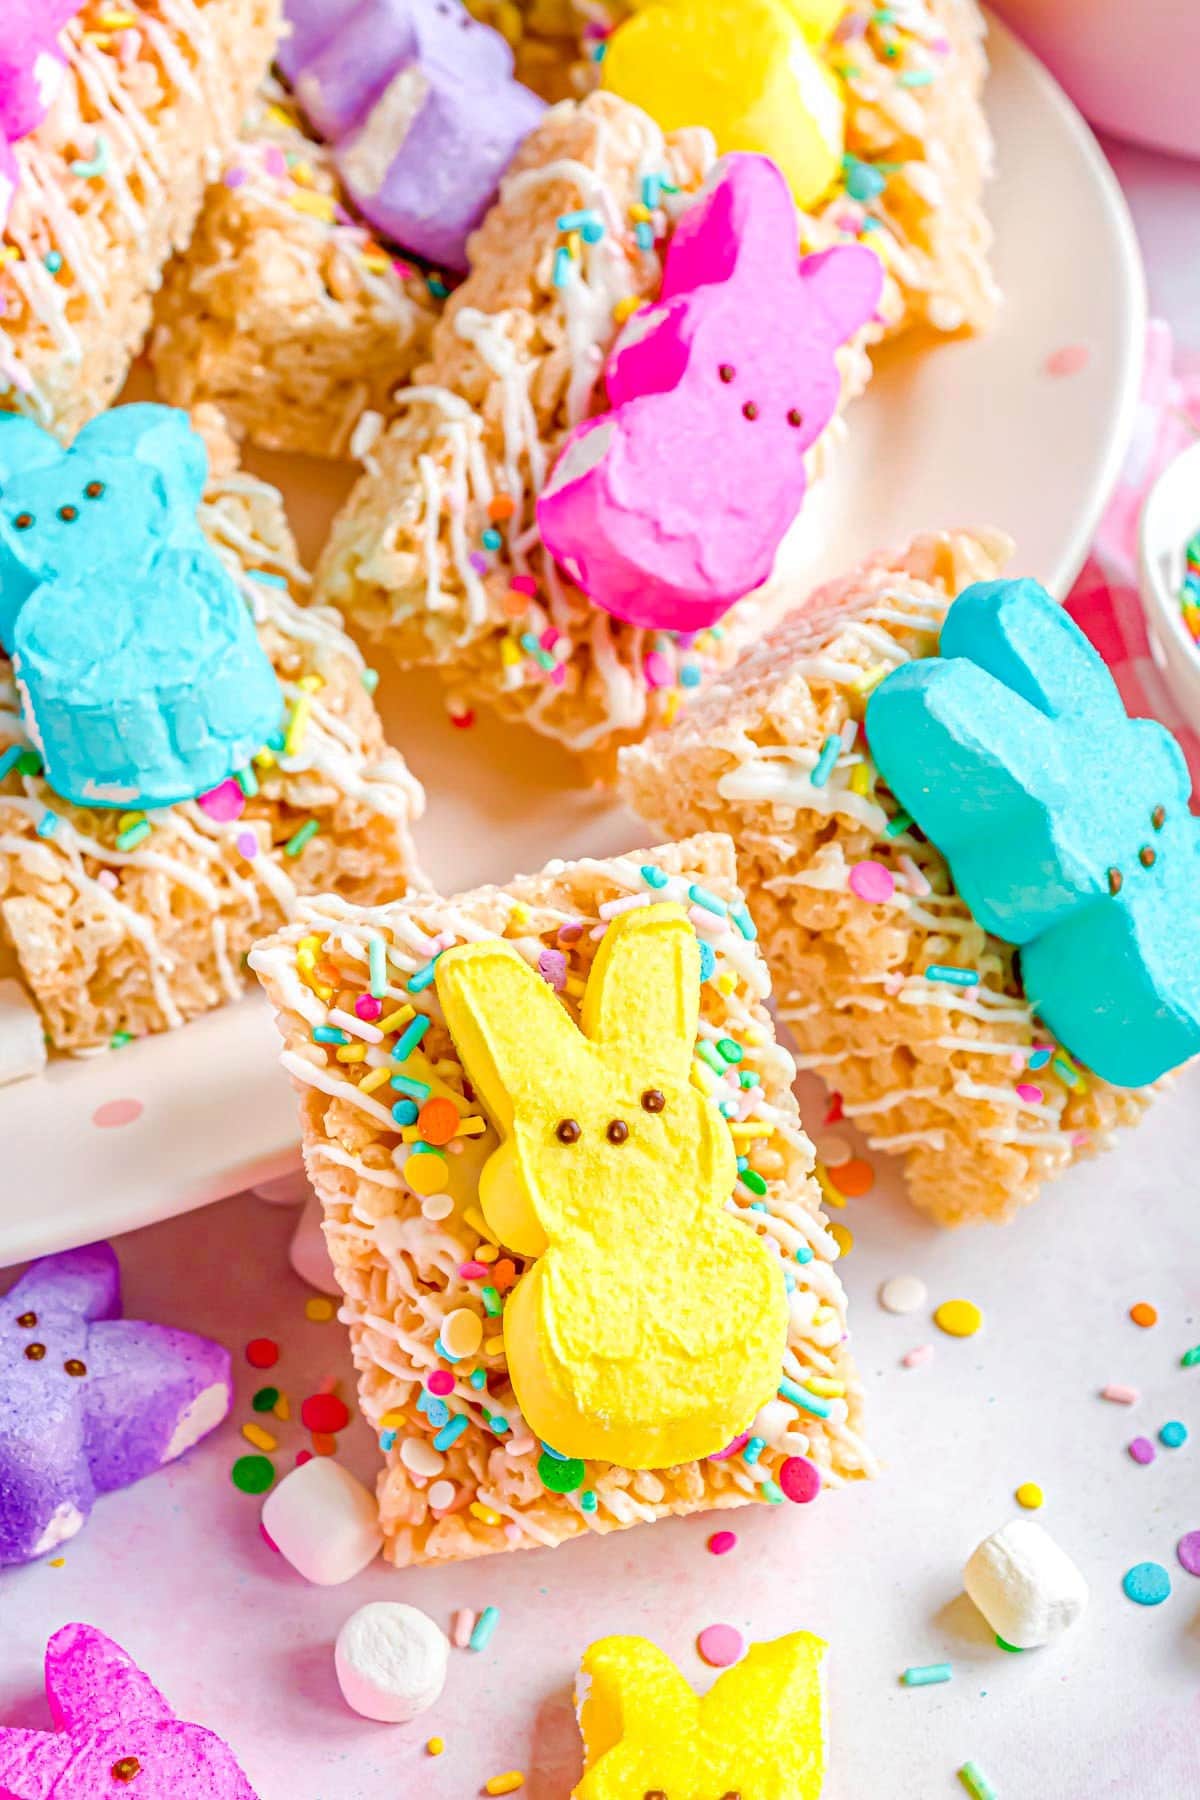 a number or rice krispie treats decorated with sprinkles and topped with an Easter peep sitting on a white plate and a few around the plate.